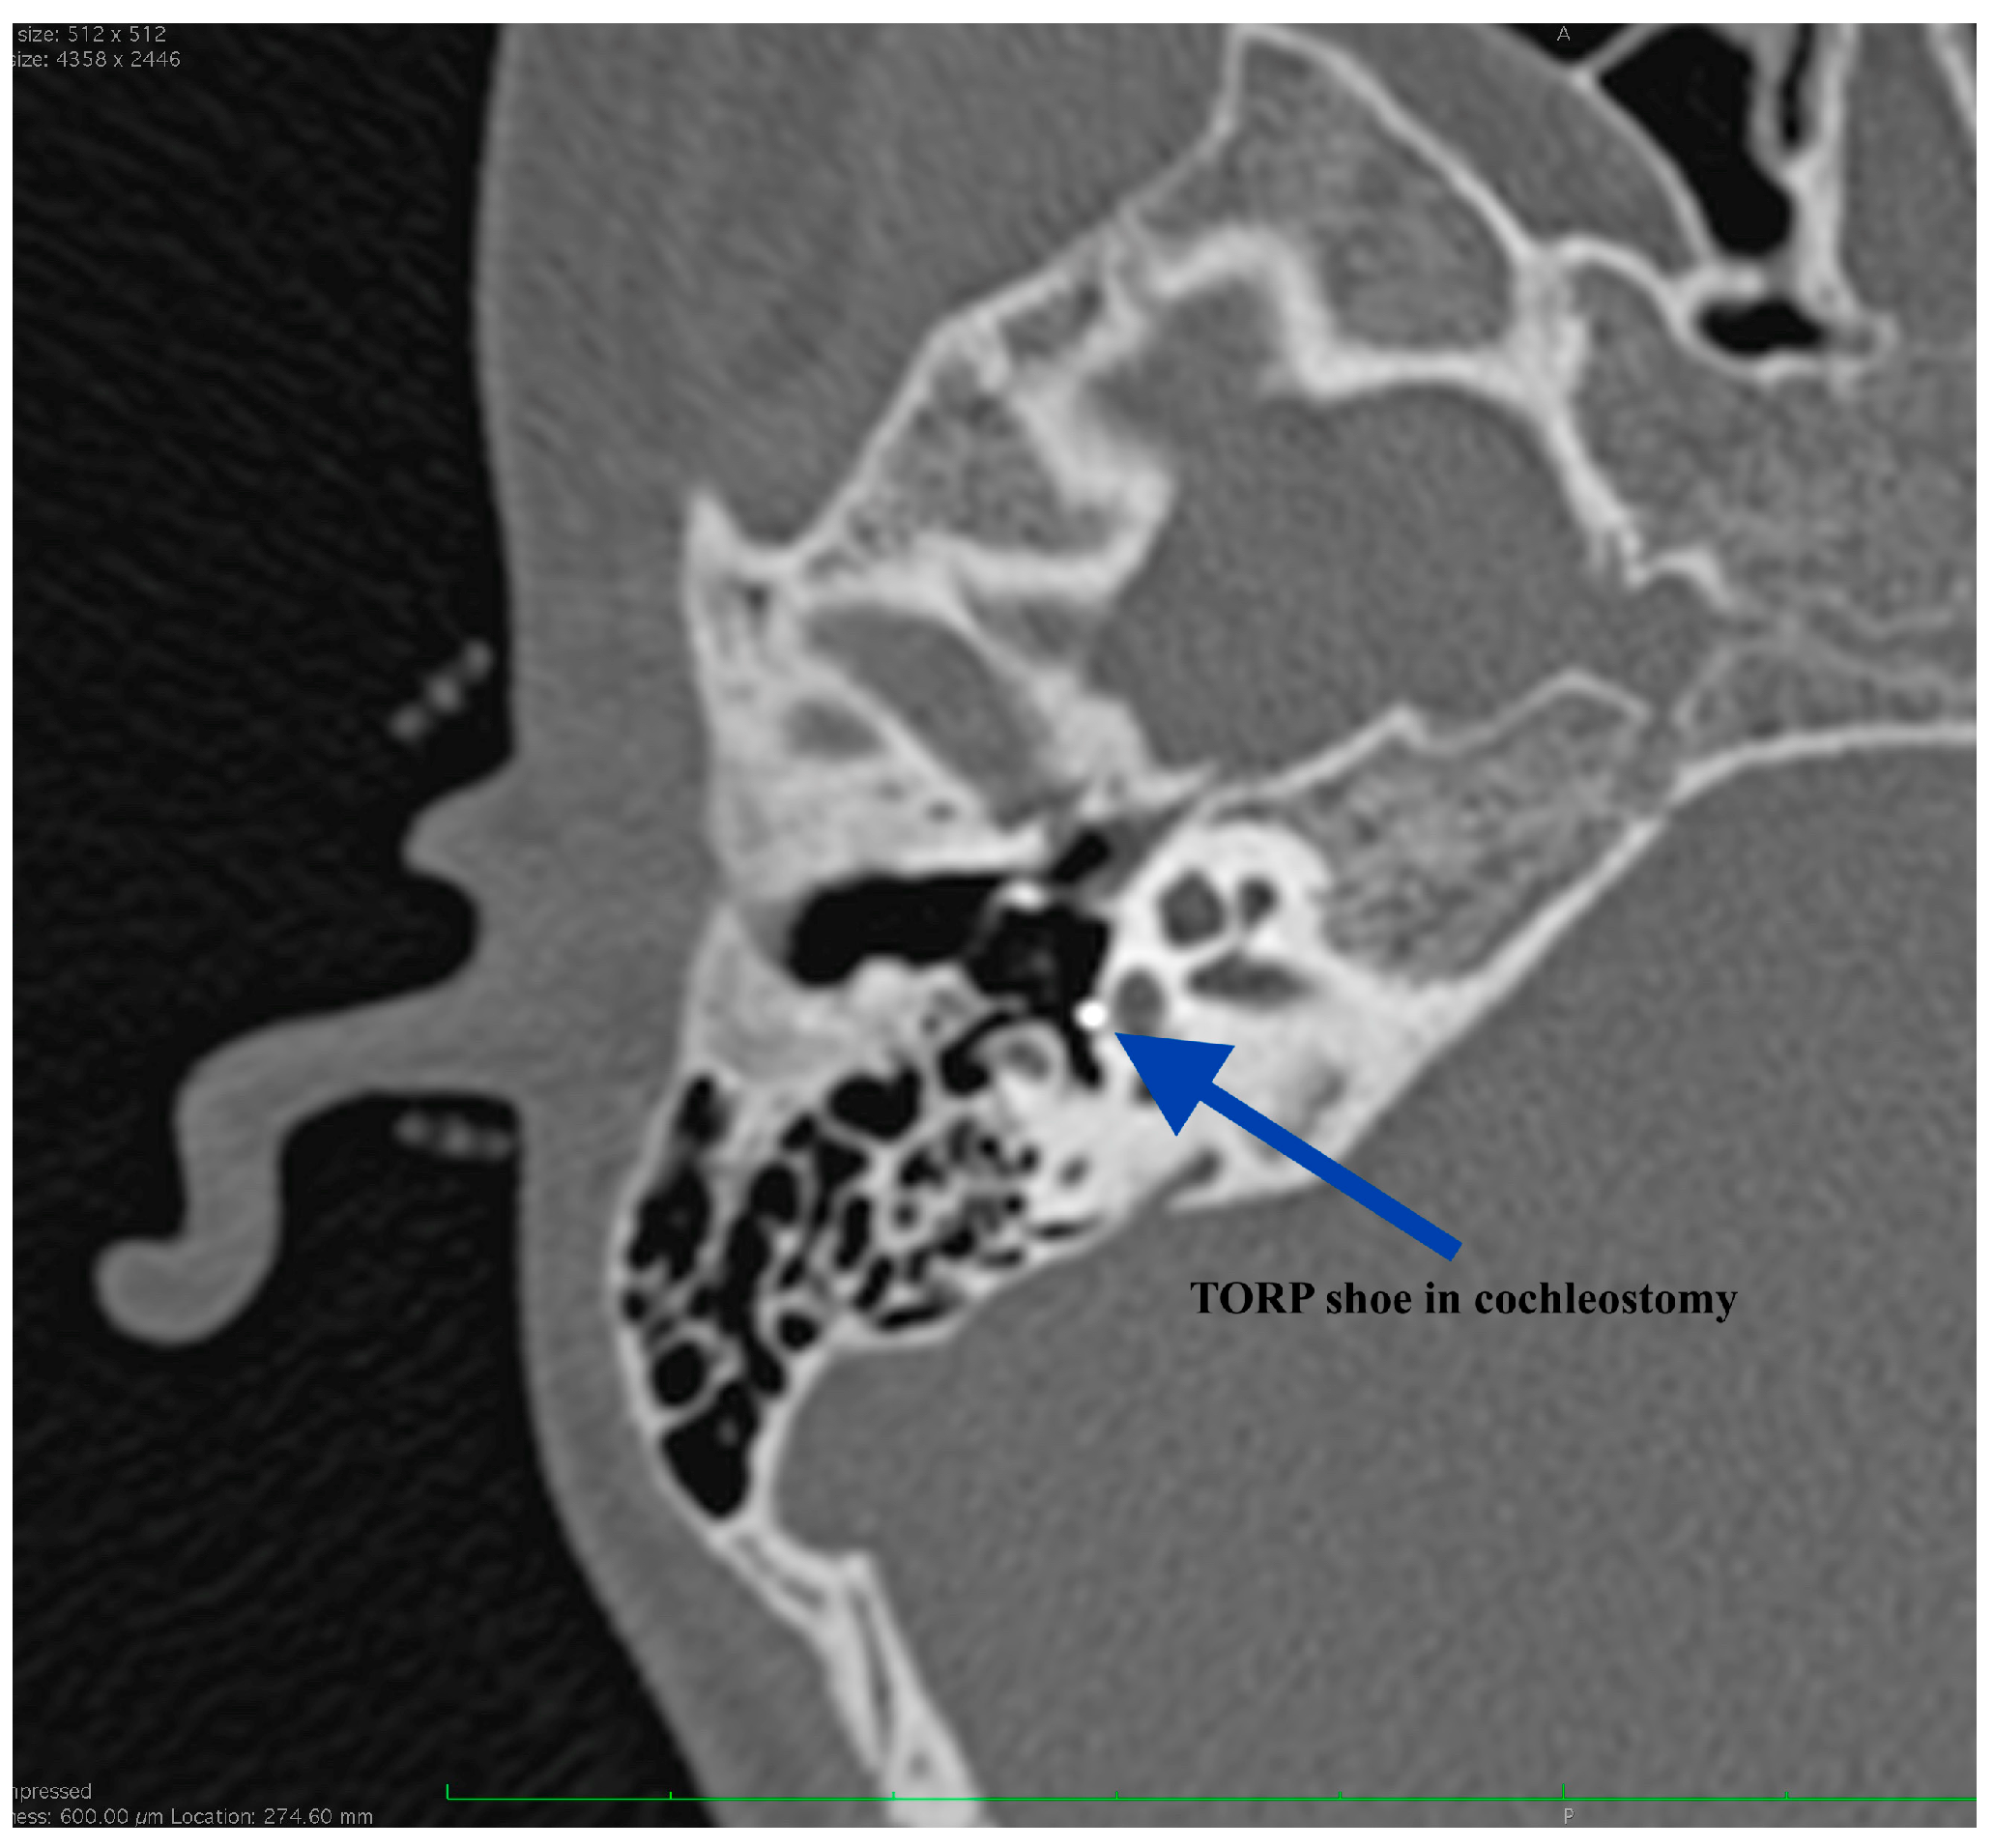 Stapes, Radiology Reference Article